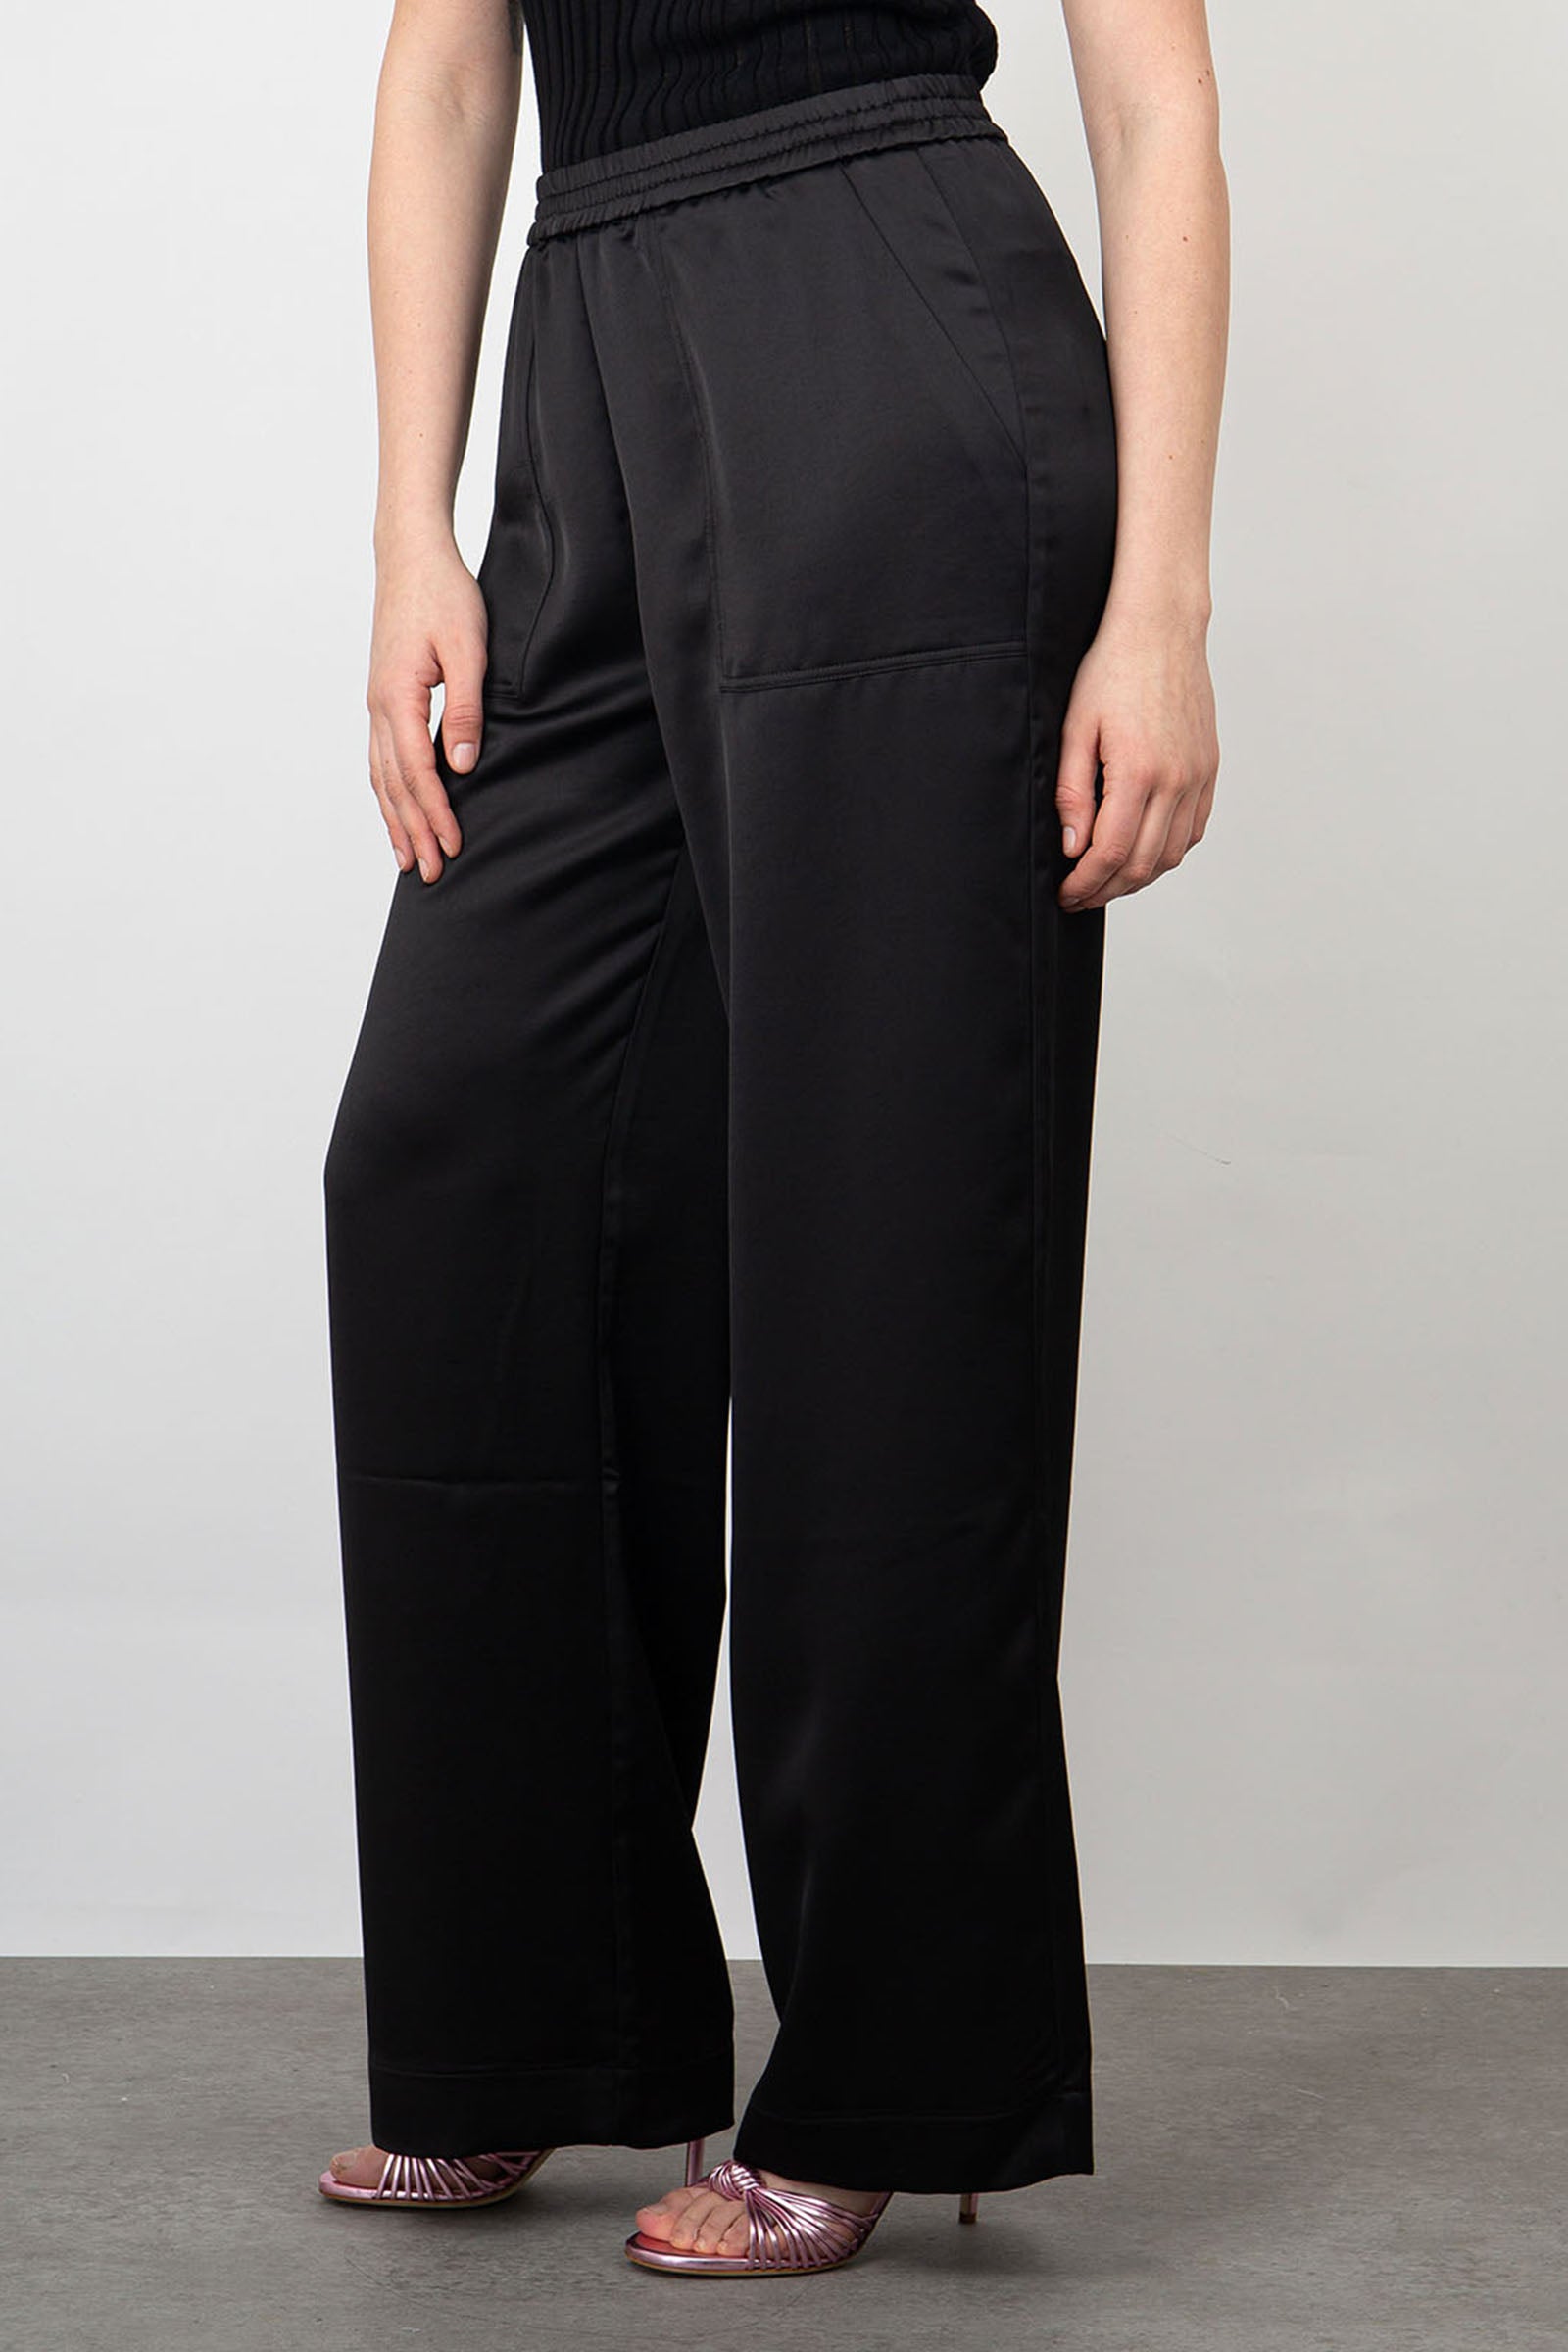 Roberto Collina Soft Satin Black Synthetic Trousers - 3